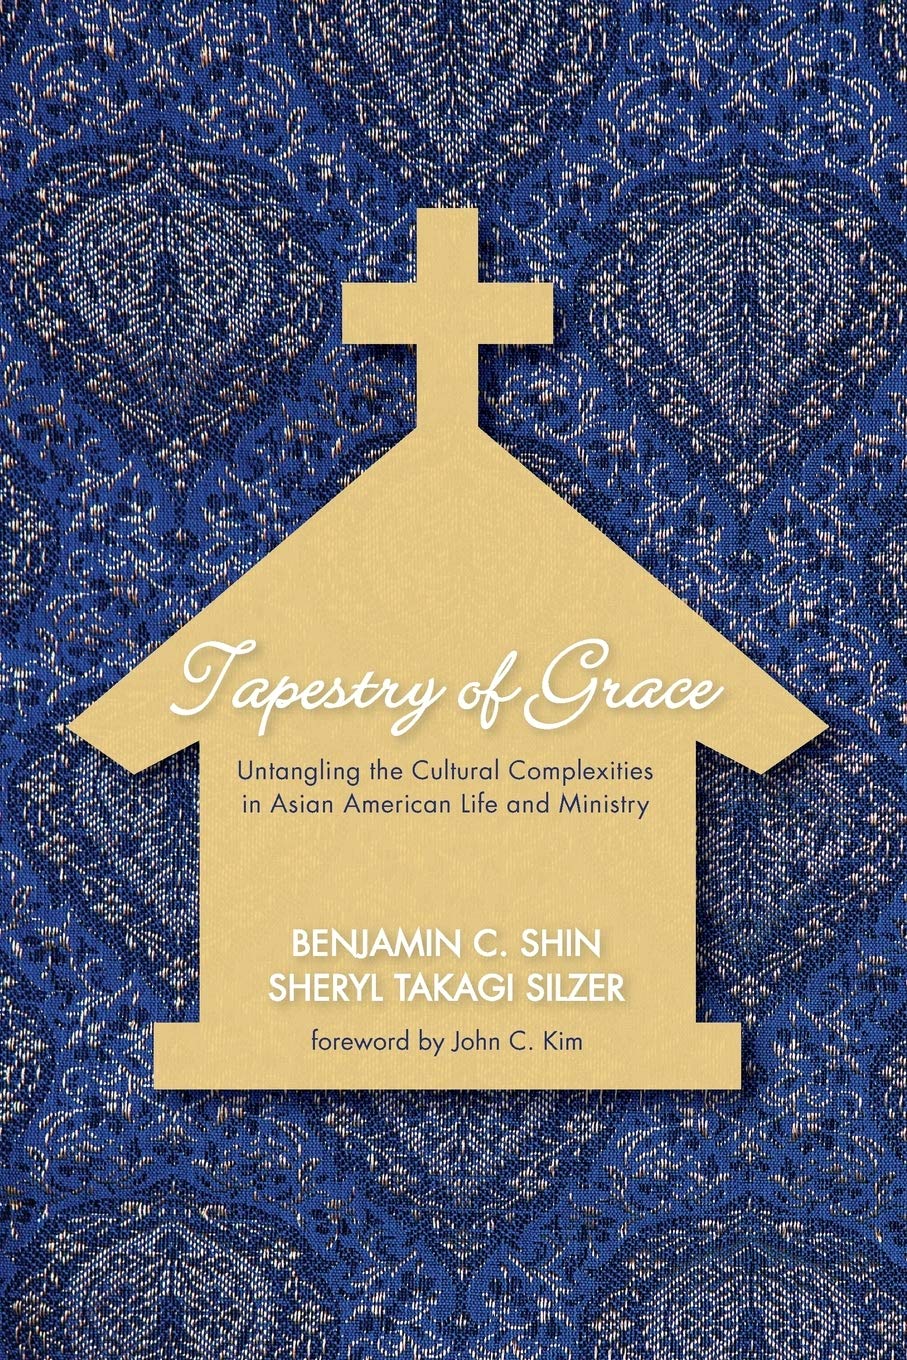 Tapestry of Grace: Untangling the Cultural Complexities in Asian American Life and Ministry